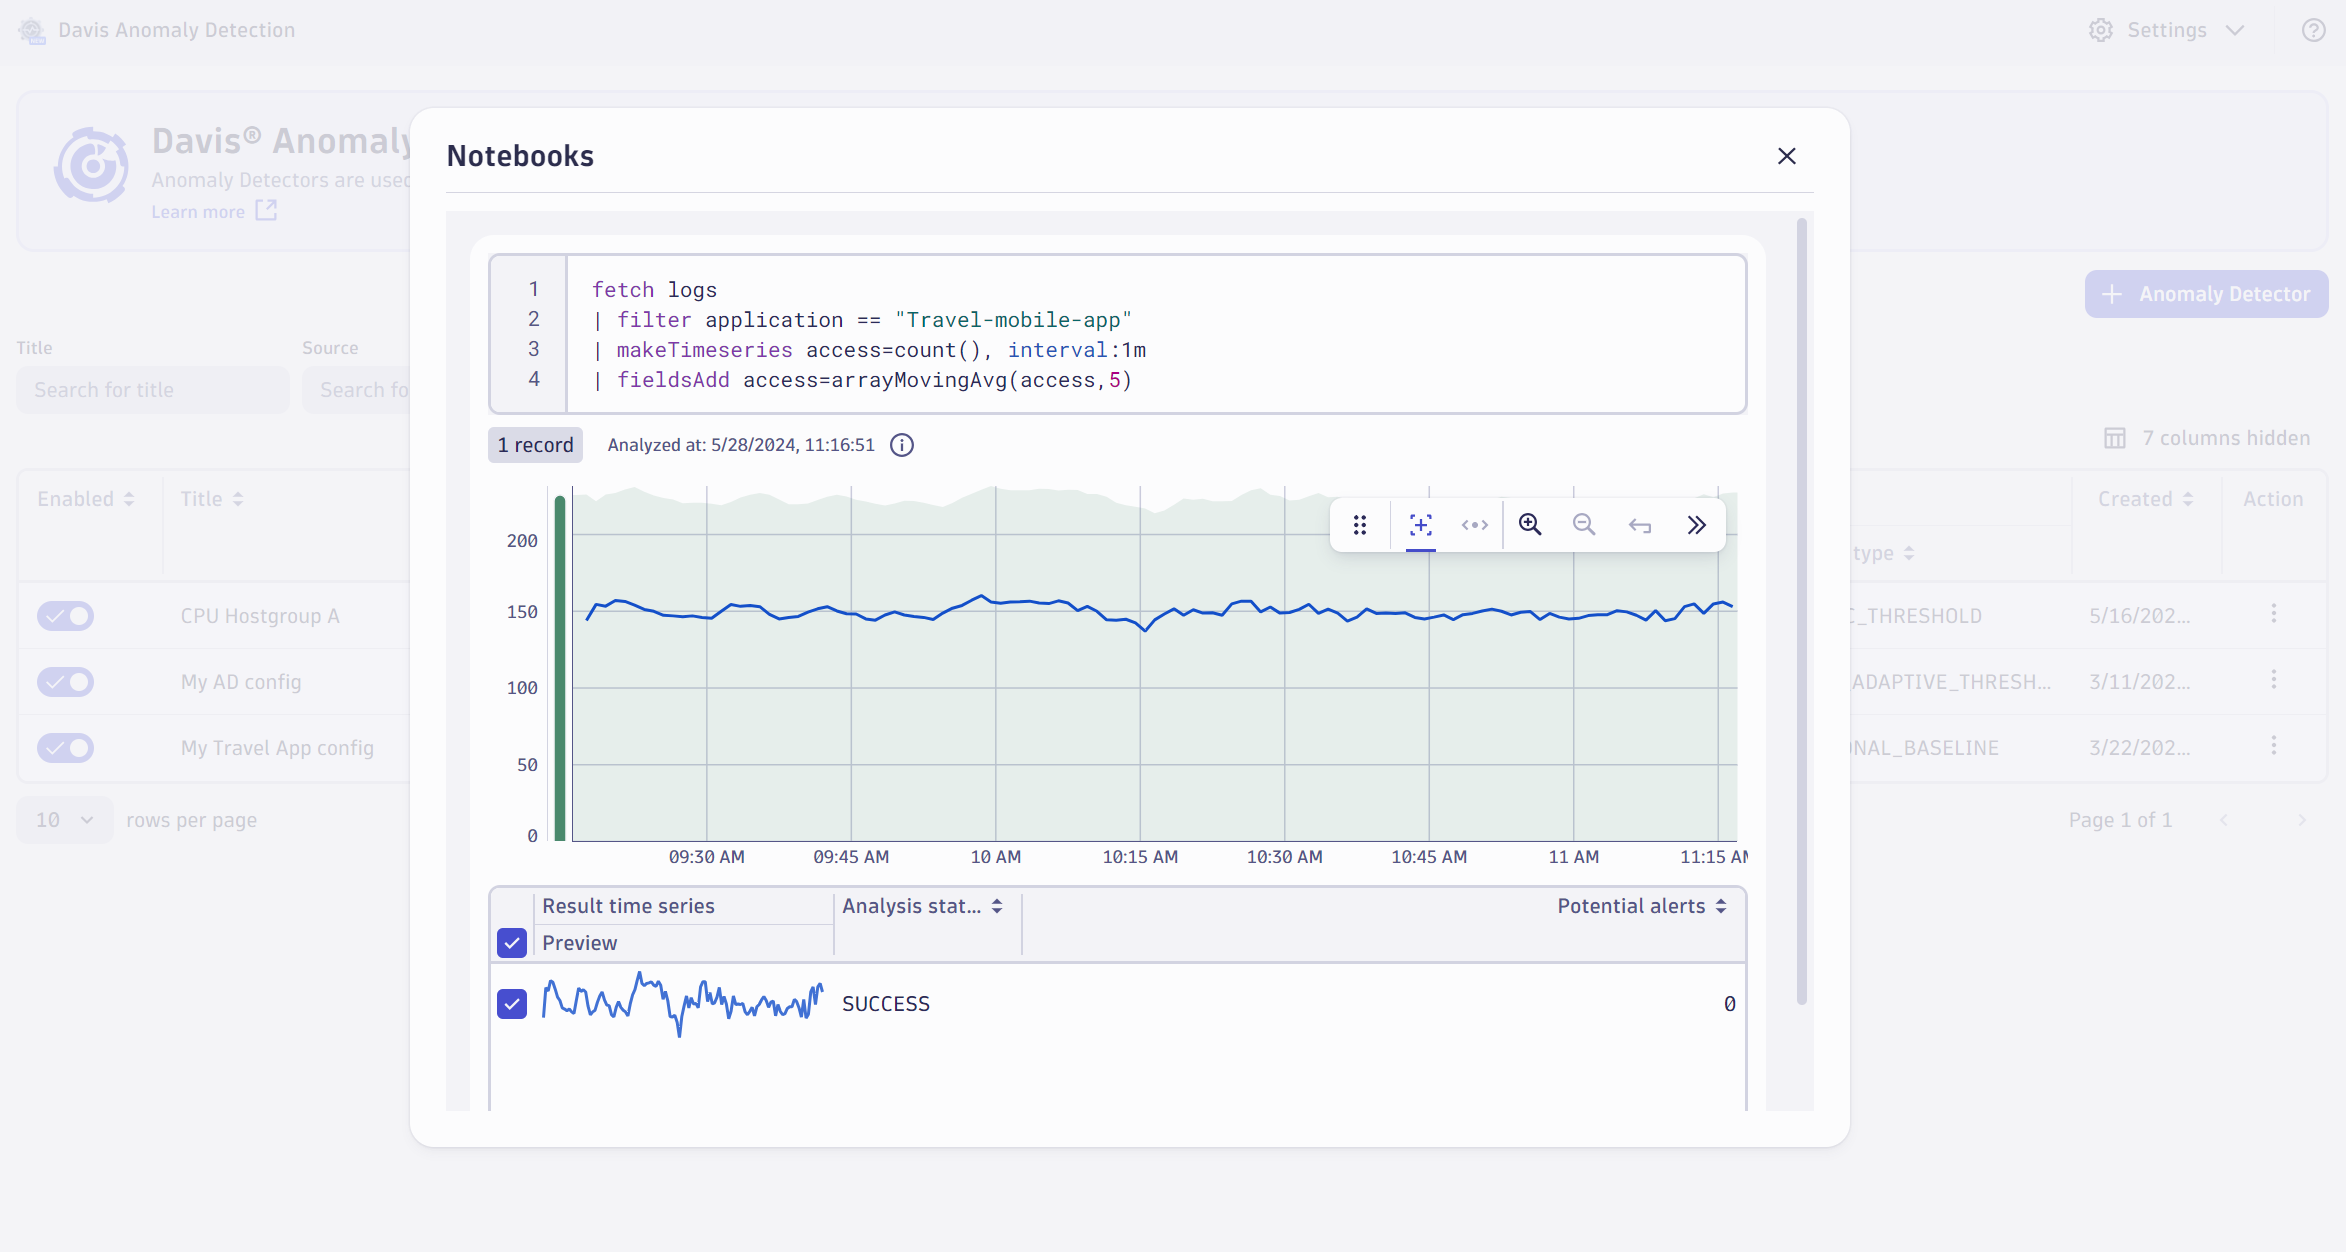 Visualize your custom anomaly detectors in Notebooks without leaving Davis Anomaly Detection.